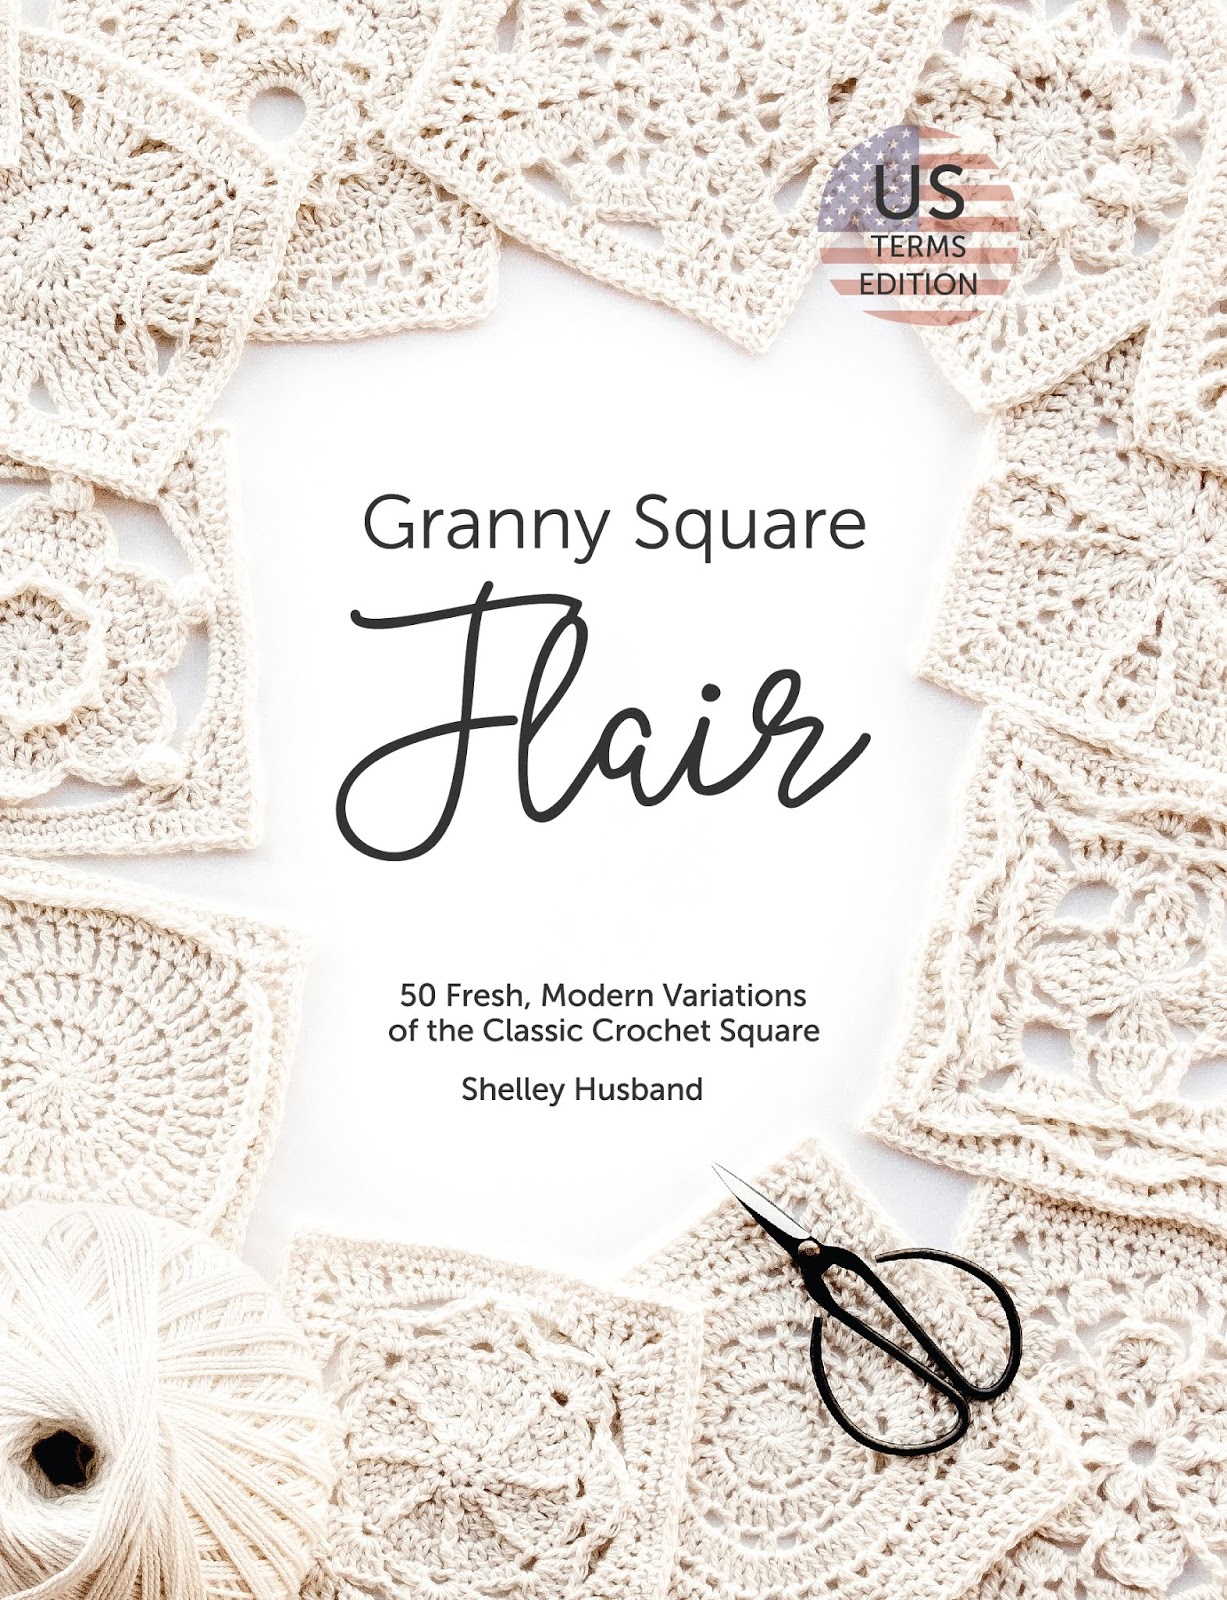 Granny Square Flair: book review and giveaway | LillaBjörn's ...